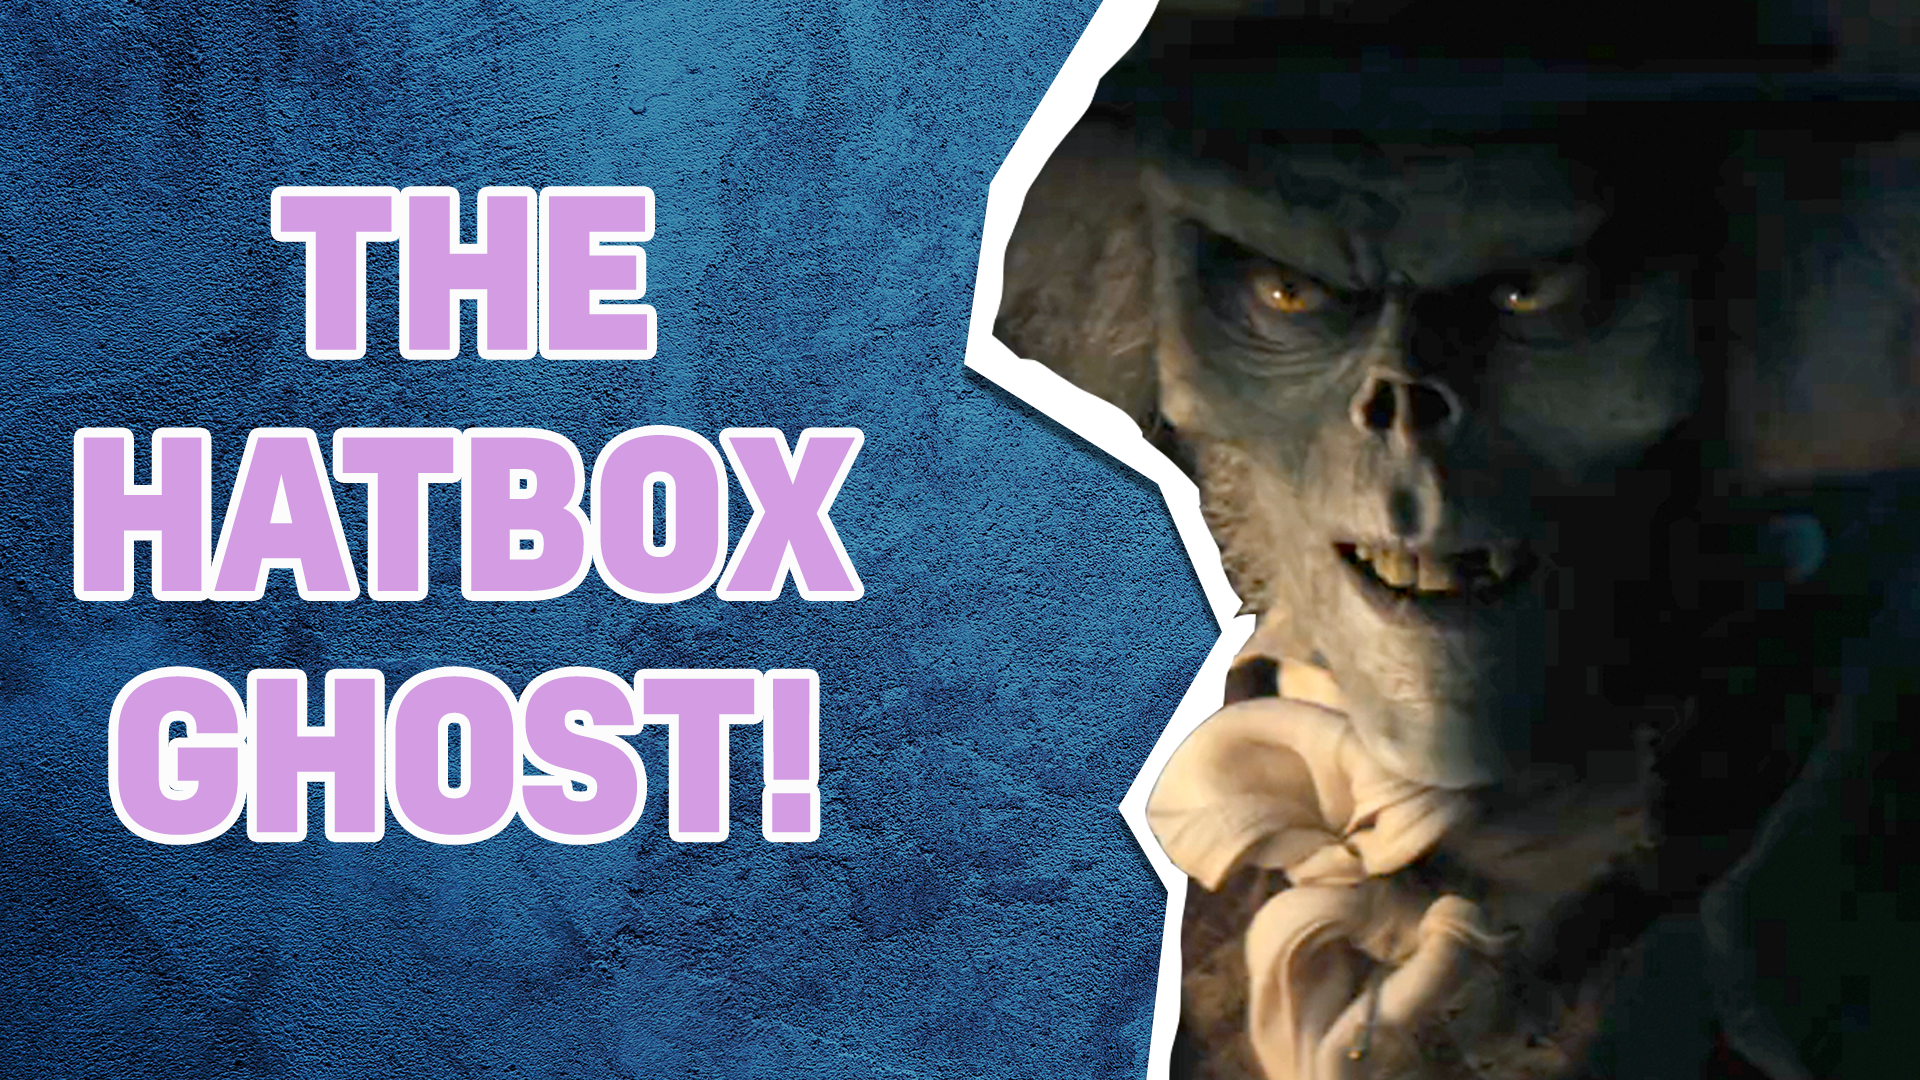 Uh oh, you're the Hatbox ghost! Your name might sound fun, but in truth you're not very nice to be around! You're seeking vengeance and you won't stop until you have it! Maybe have a nice sit down instead?